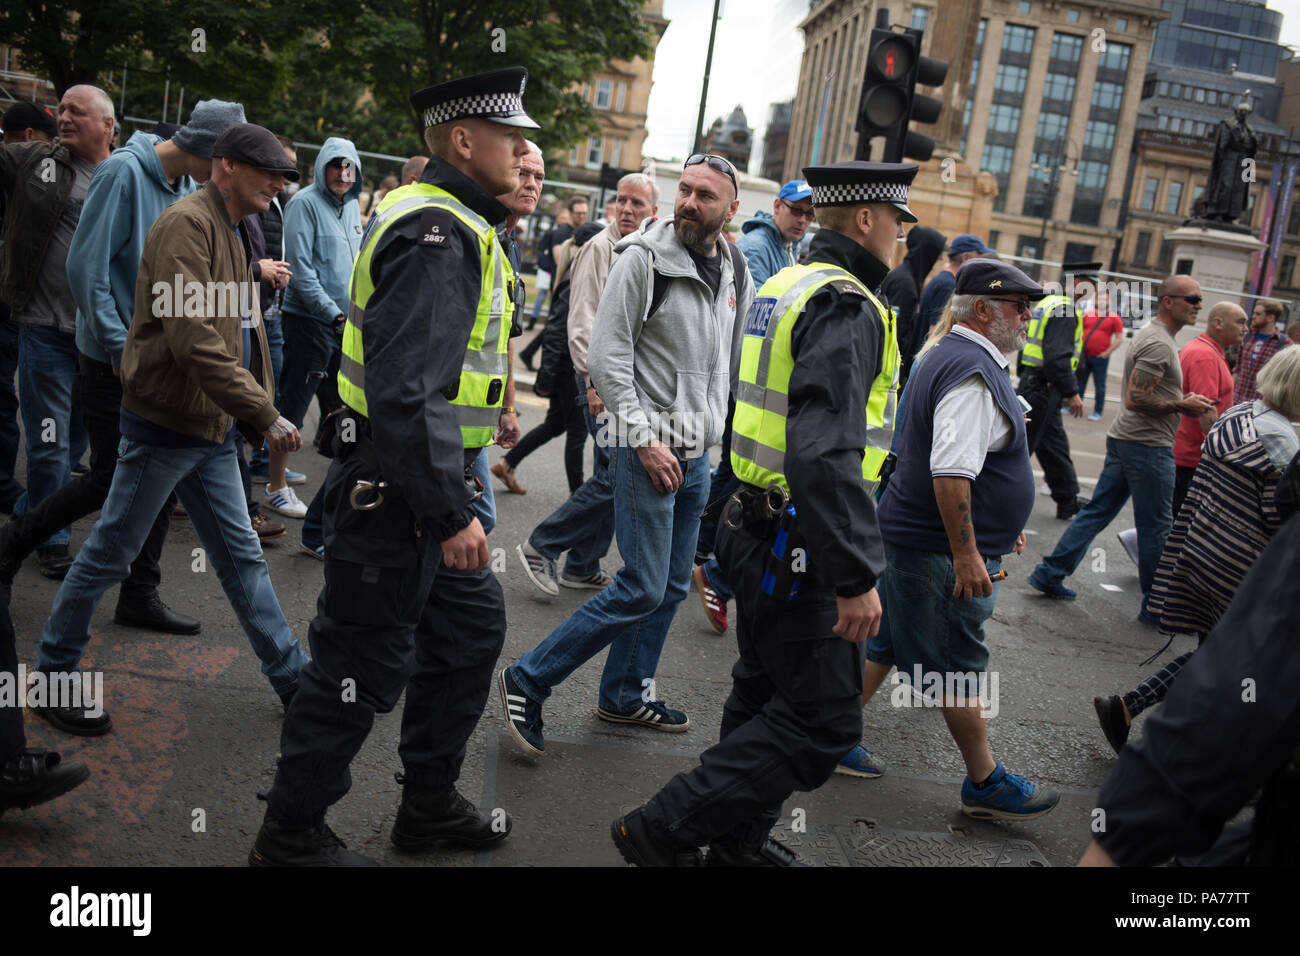 Glasgow, Scotland, on 21 July 2018. A protest by the far right Scottish Defence League, and counter demonstration by the United Against Facism groups, in George Square, Glasgow, Scotland.  Mounted police and police with dogs separated the two groups as the Scottish Defence League espoused their anti-immigrant rhetoric and accused immigrants of running grooming gangs. Image credit: Alamy News. Stock Photo